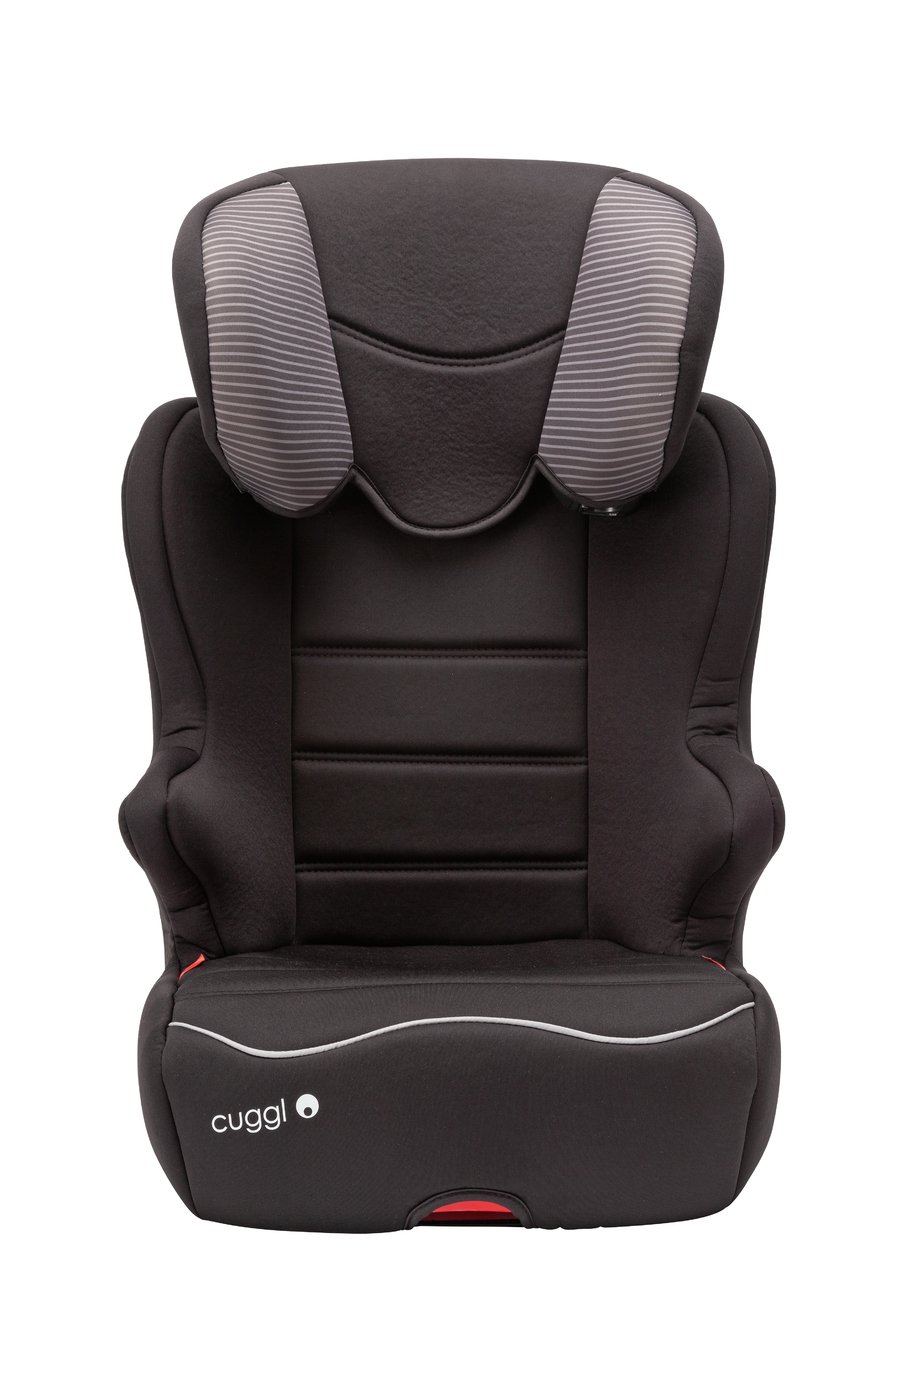 Cuggl Sandpiper Group 2/3 ISOFIX Car Seat Review